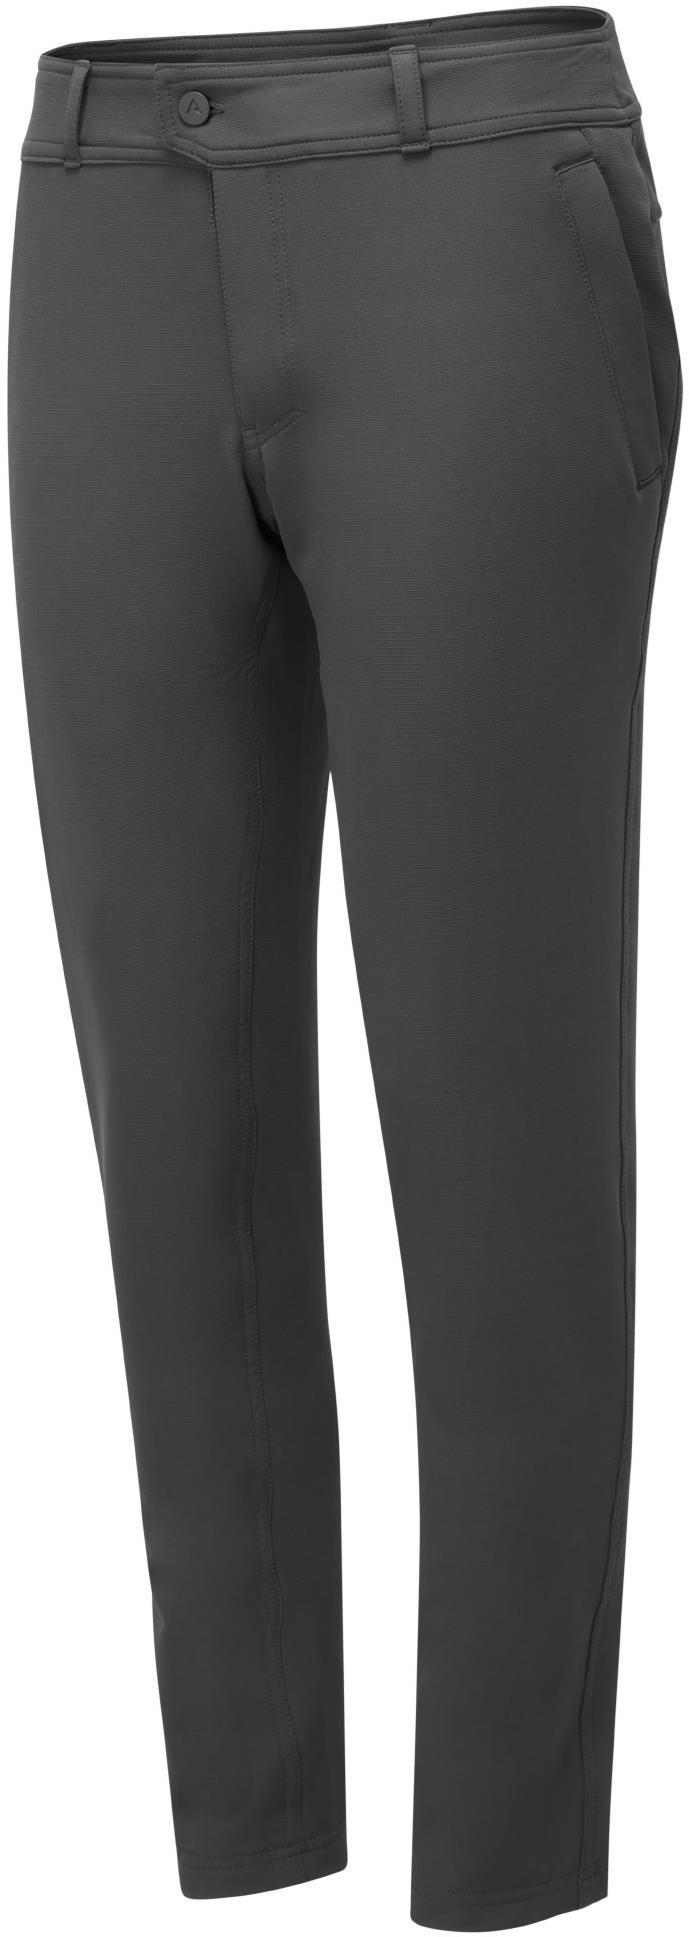 All Roads Repel Womens Trousers image 0